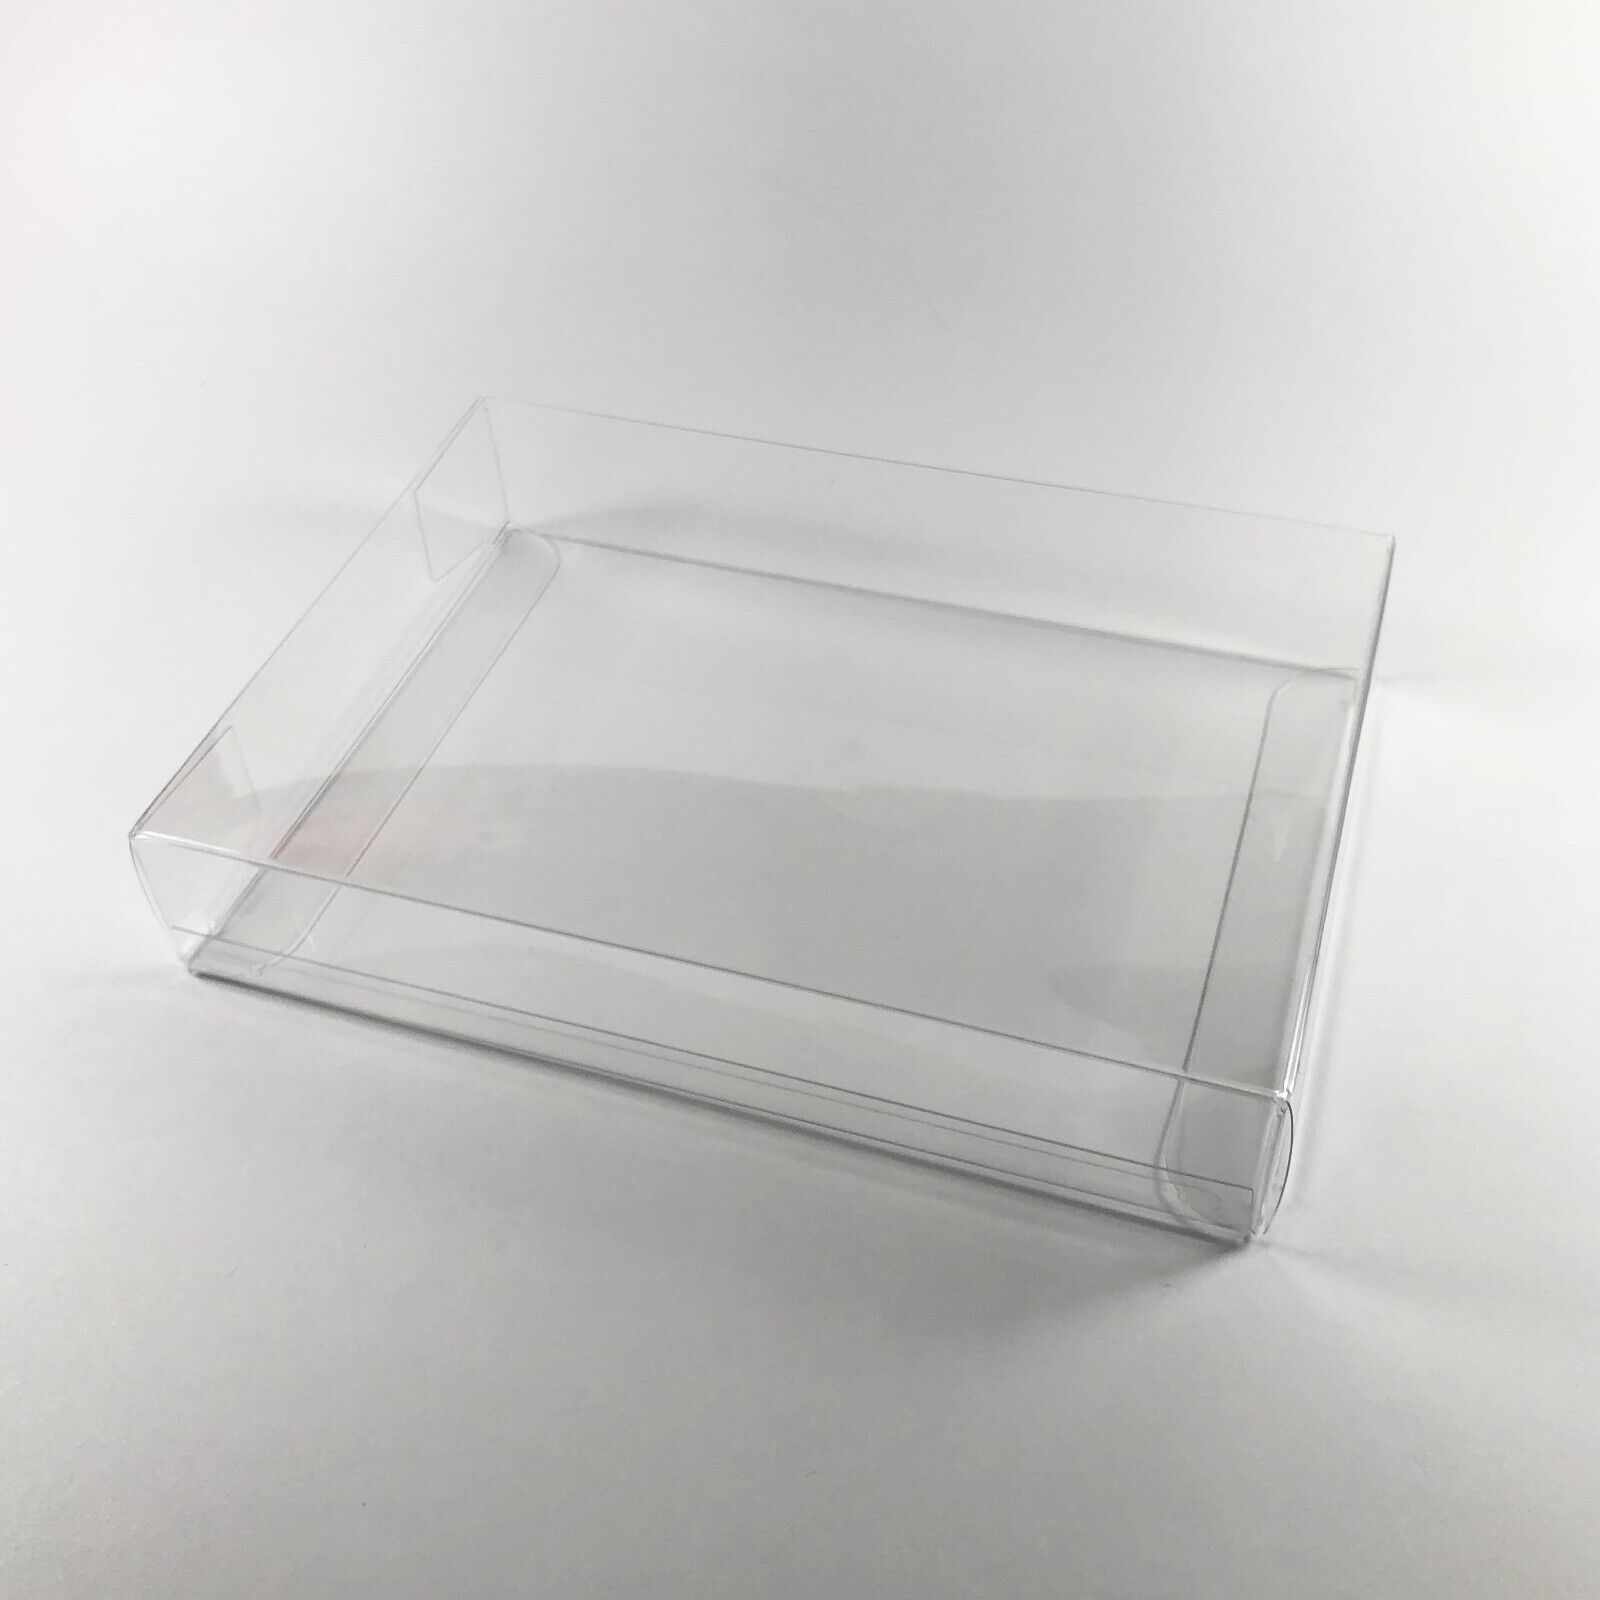 10 SNES Clear Plastic Box Protector Sleeve Case for Complete CIB Games Unbranded/Generic Does Not Apply - фотография #12